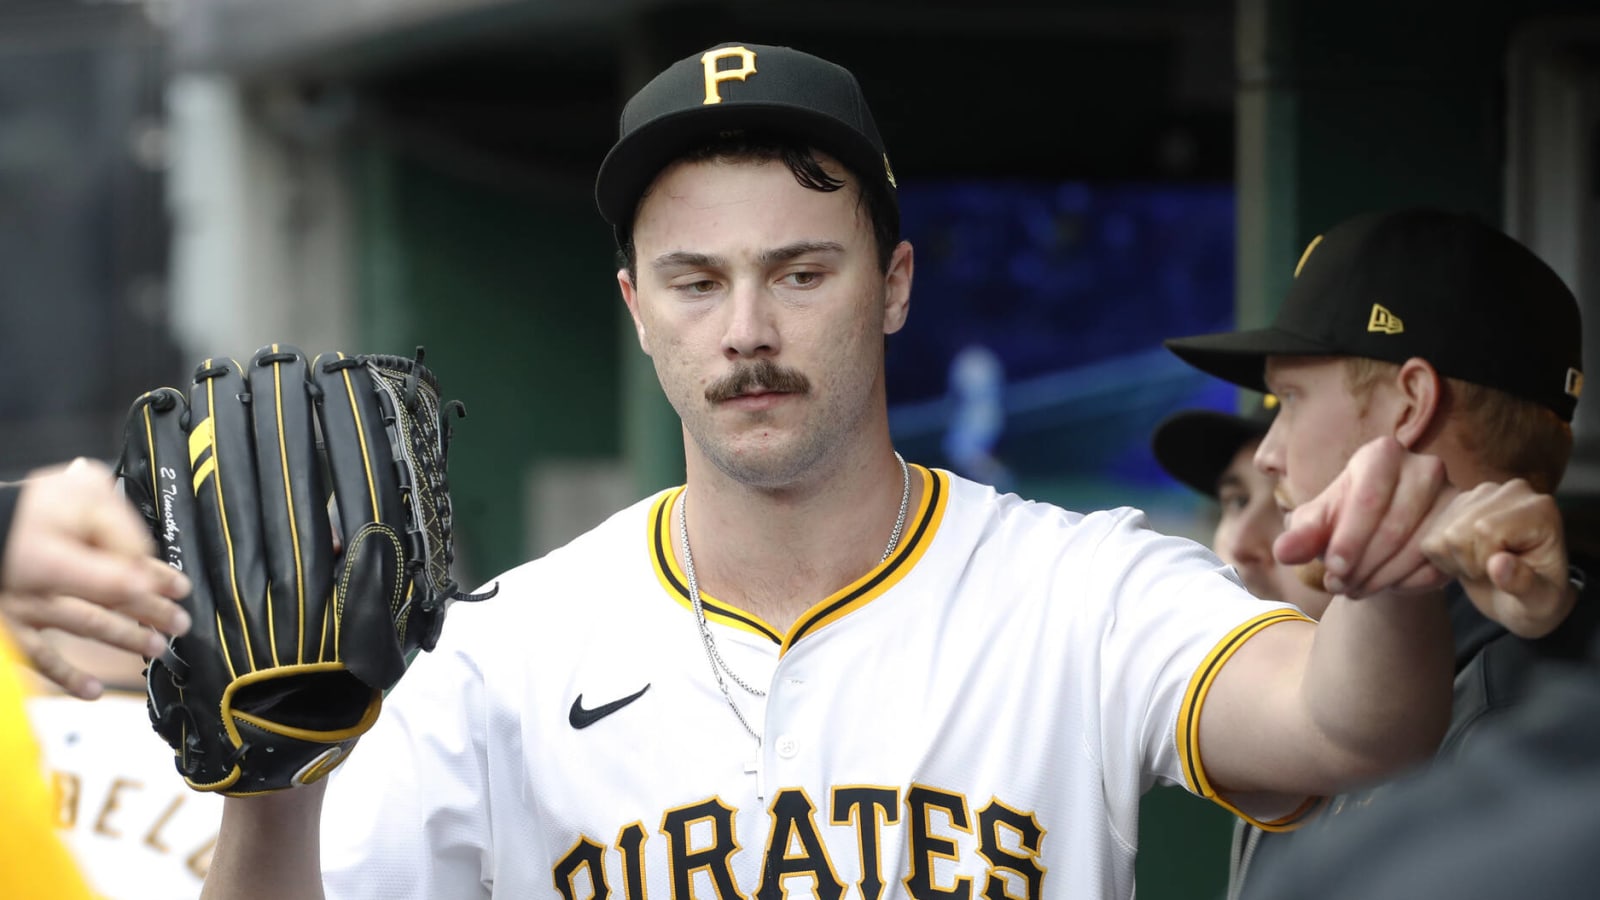 Paul Skenes experiences the Pirates' incompetence in debut